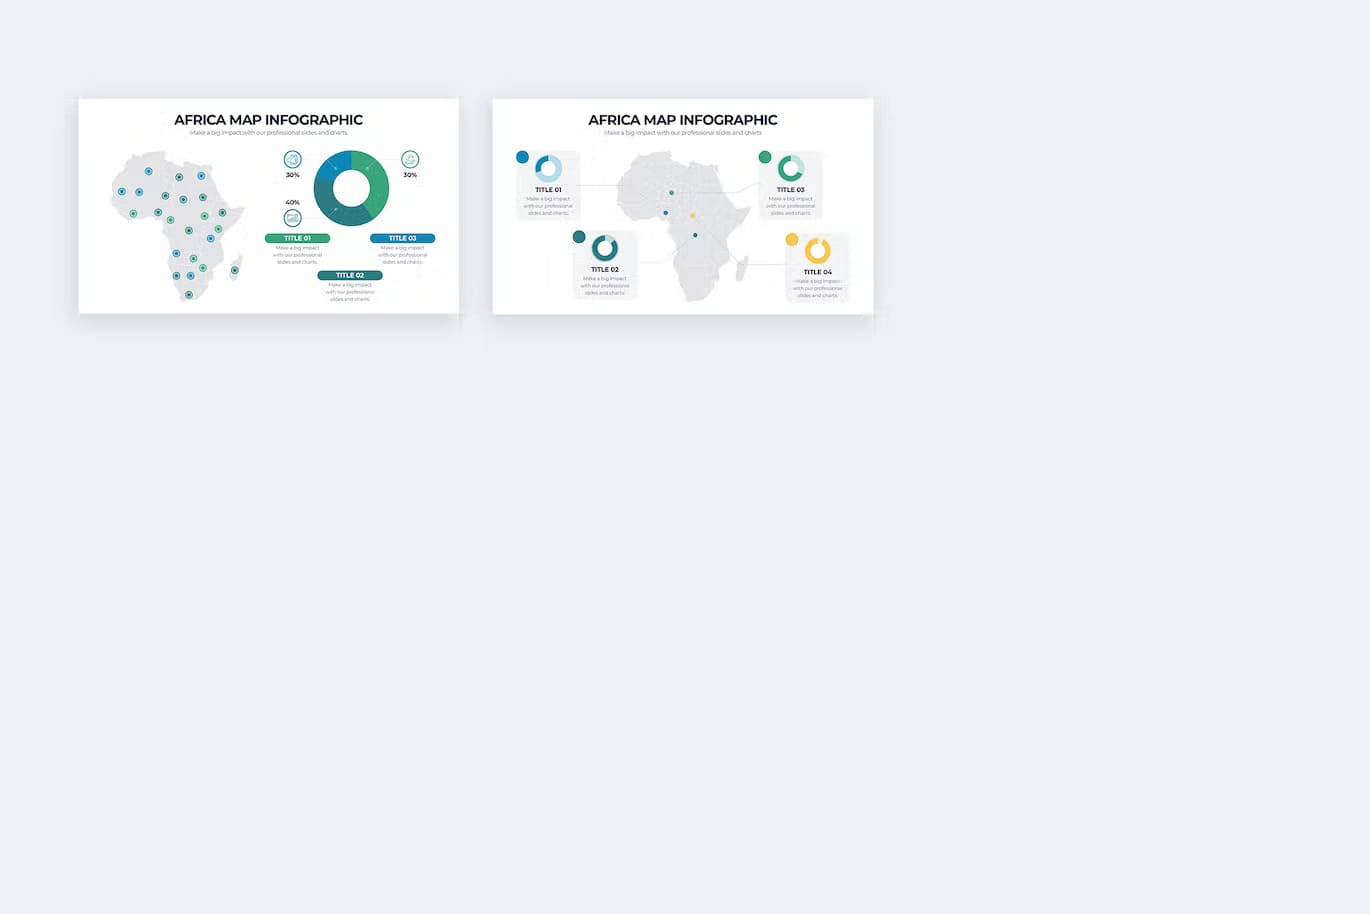 Two slides about Africa map infographic.